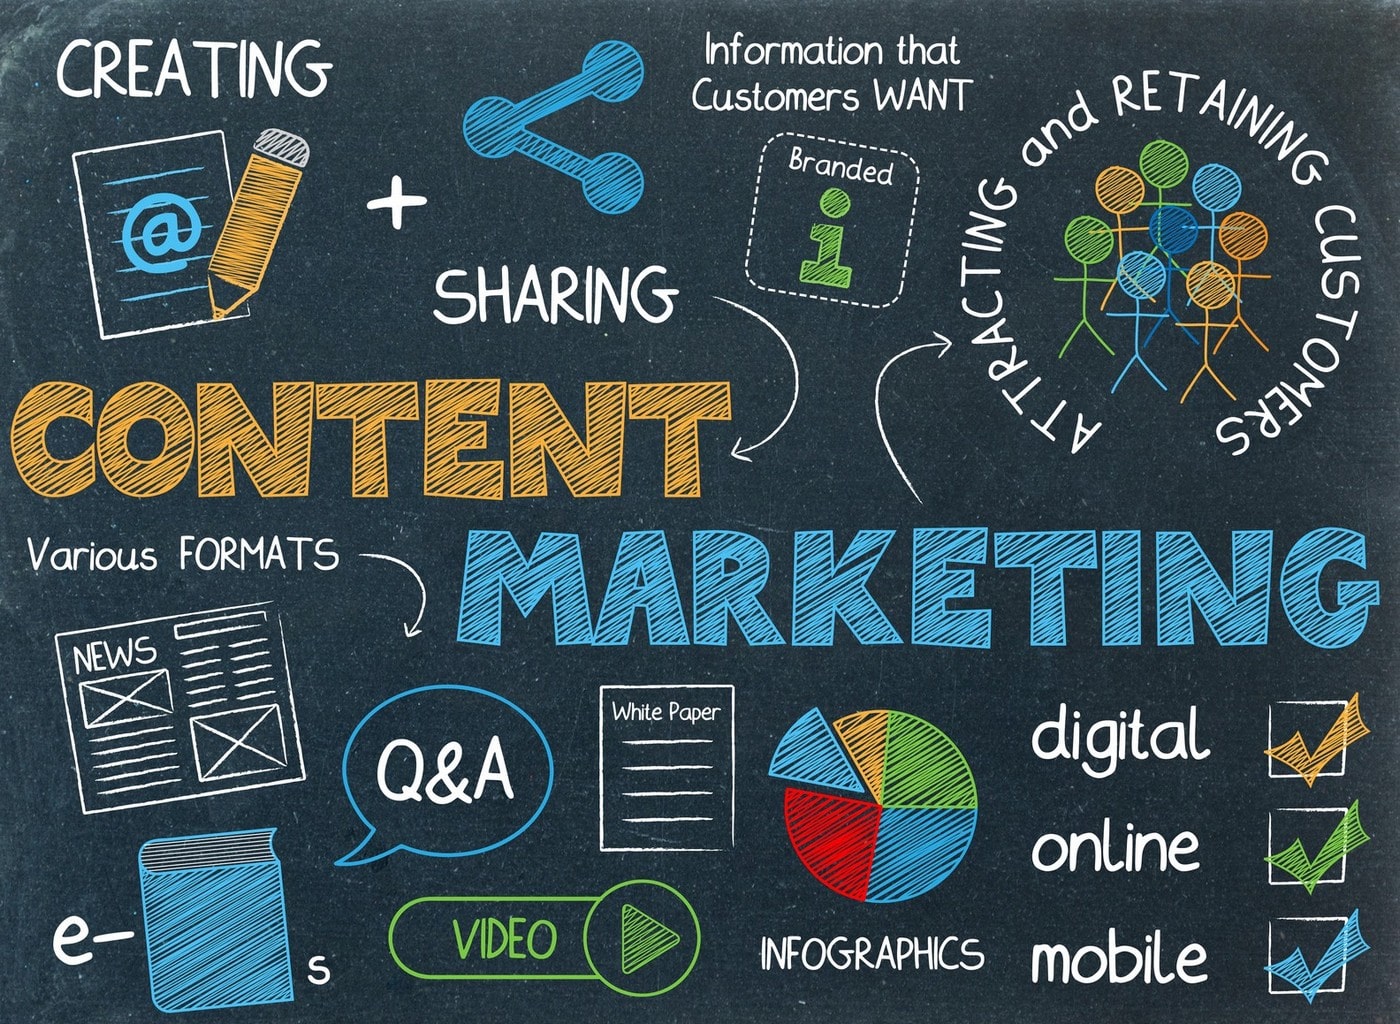 Content Marketing: Who to direct it to? To people or search engines?